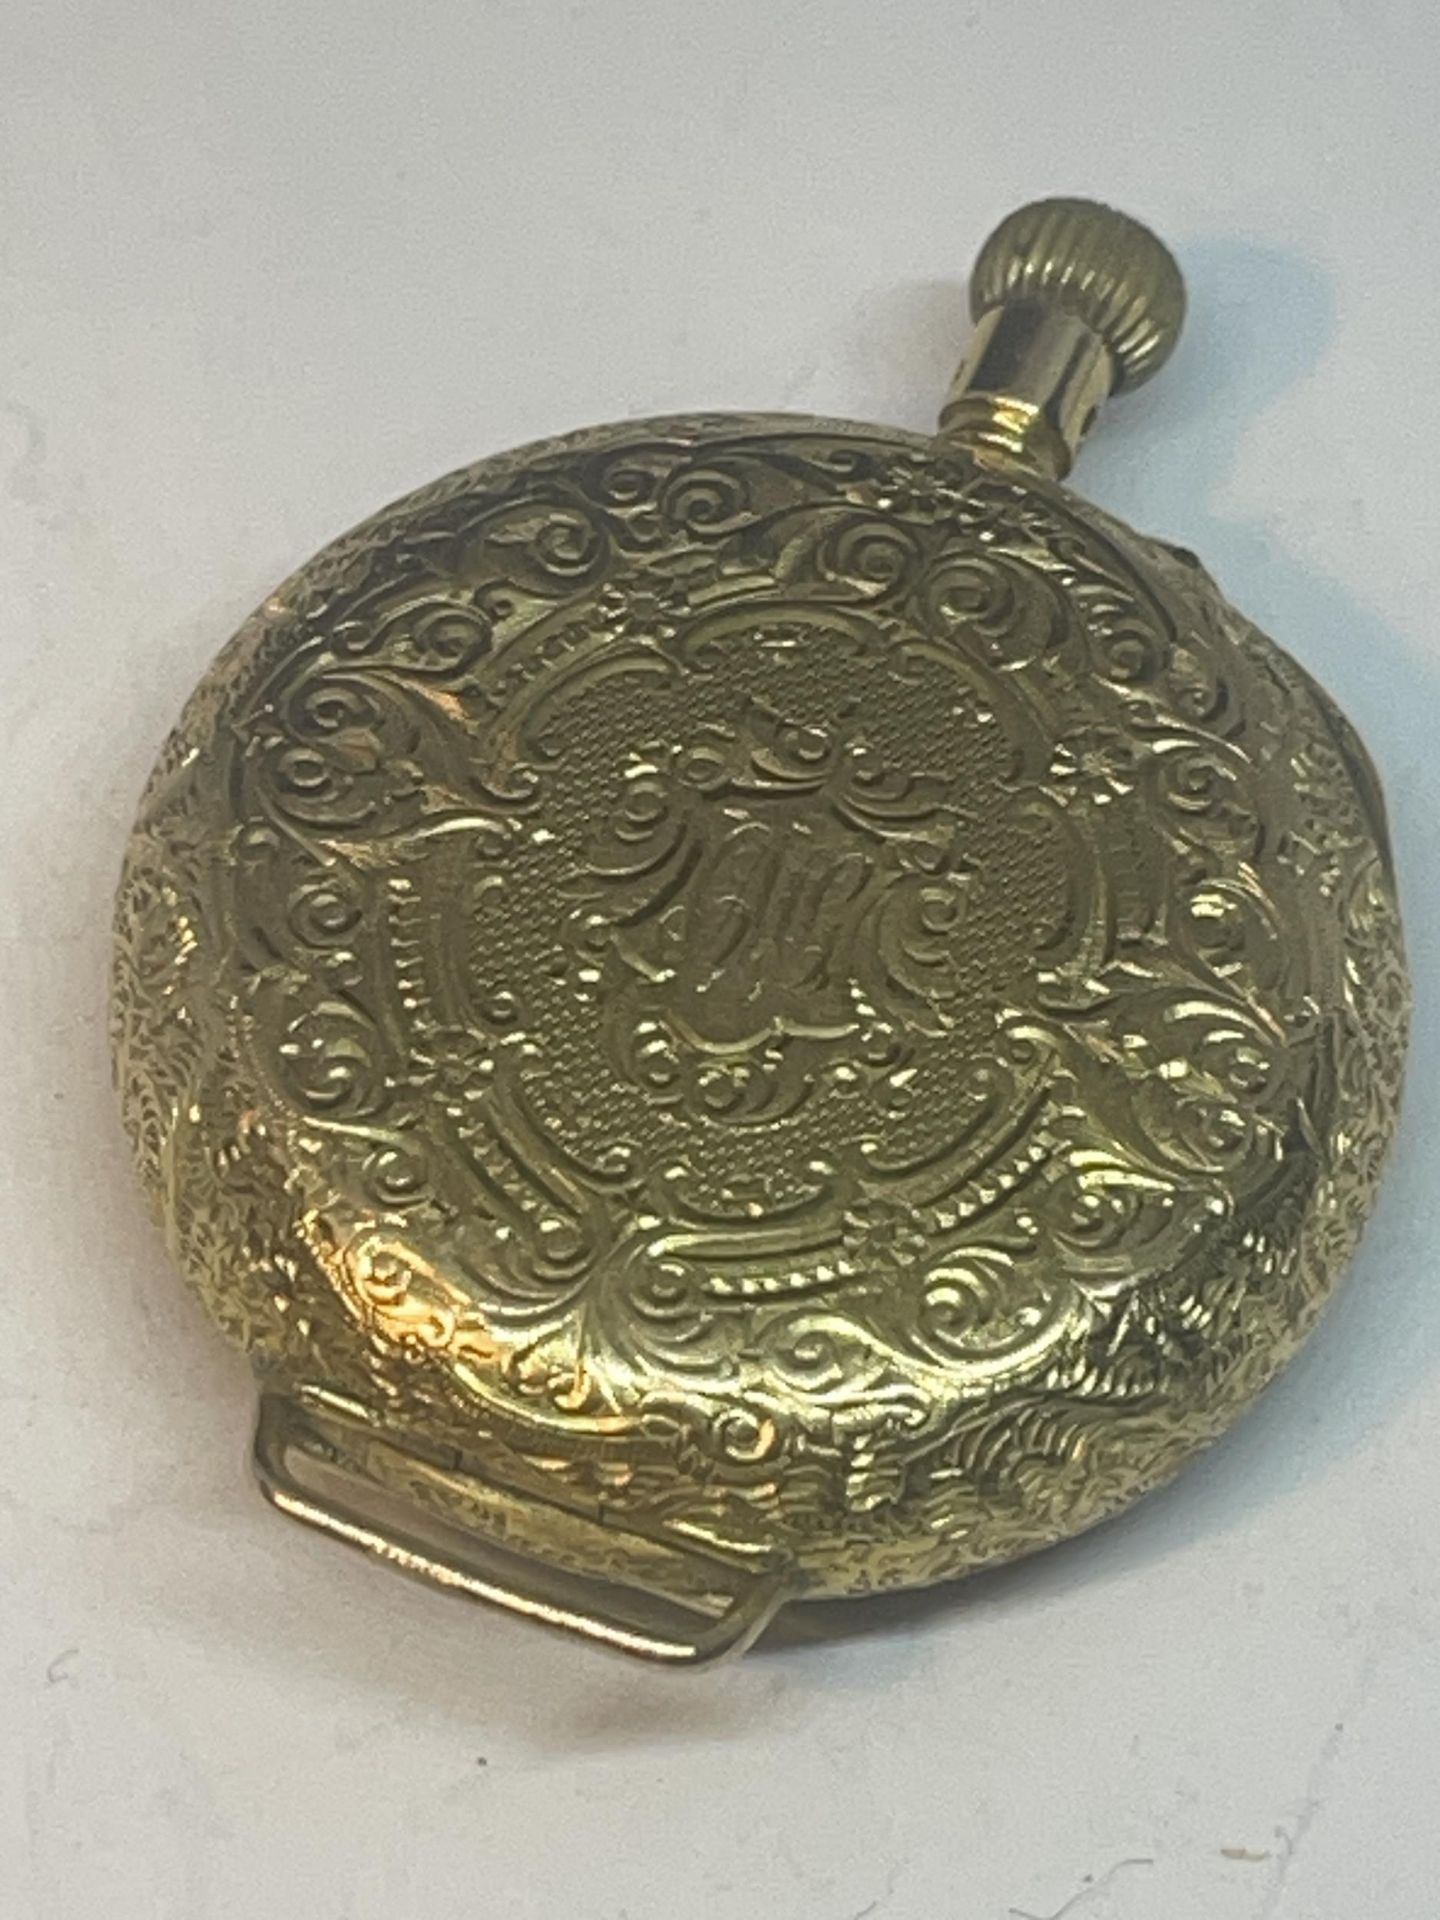 A 14CT GOLD LADIES OPEN FACED POCKET WATCH GROSS WEIGHT 32.37 GRAMS - Image 2 of 5